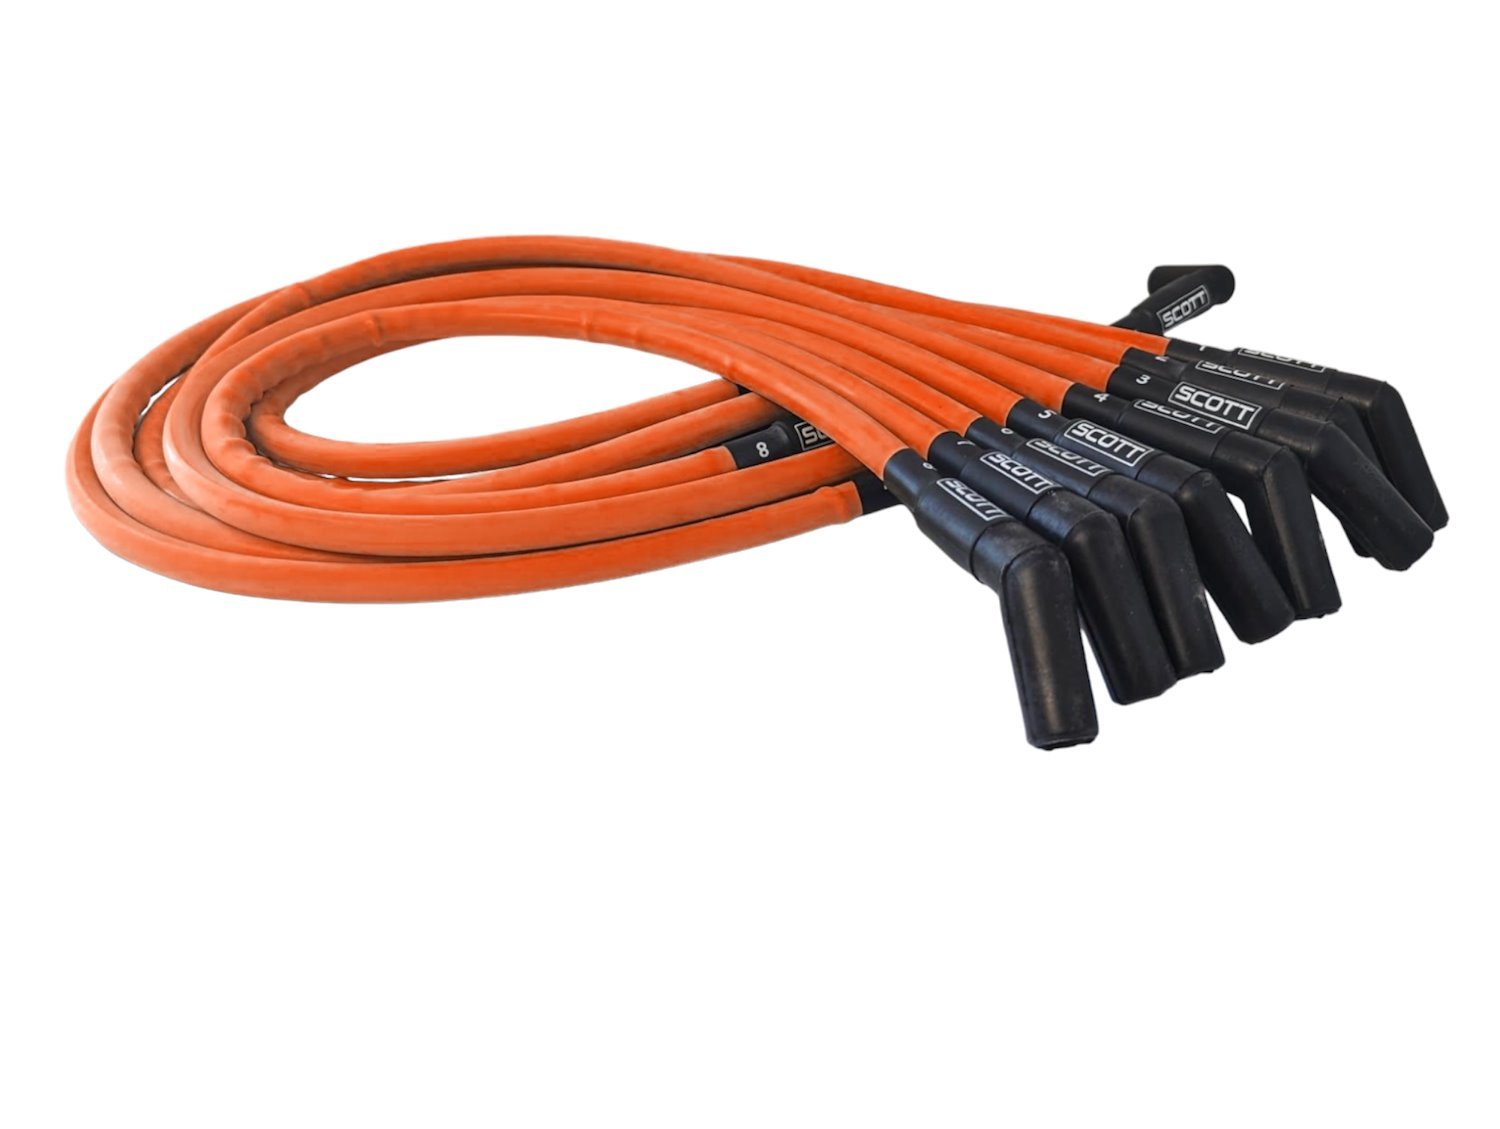 SPW-CH-426-9 High-Performance Silicone-Sleeved Spark Plug Wire Set for Small Block Ford, Over Valve Cover [Fluorescent Orange]